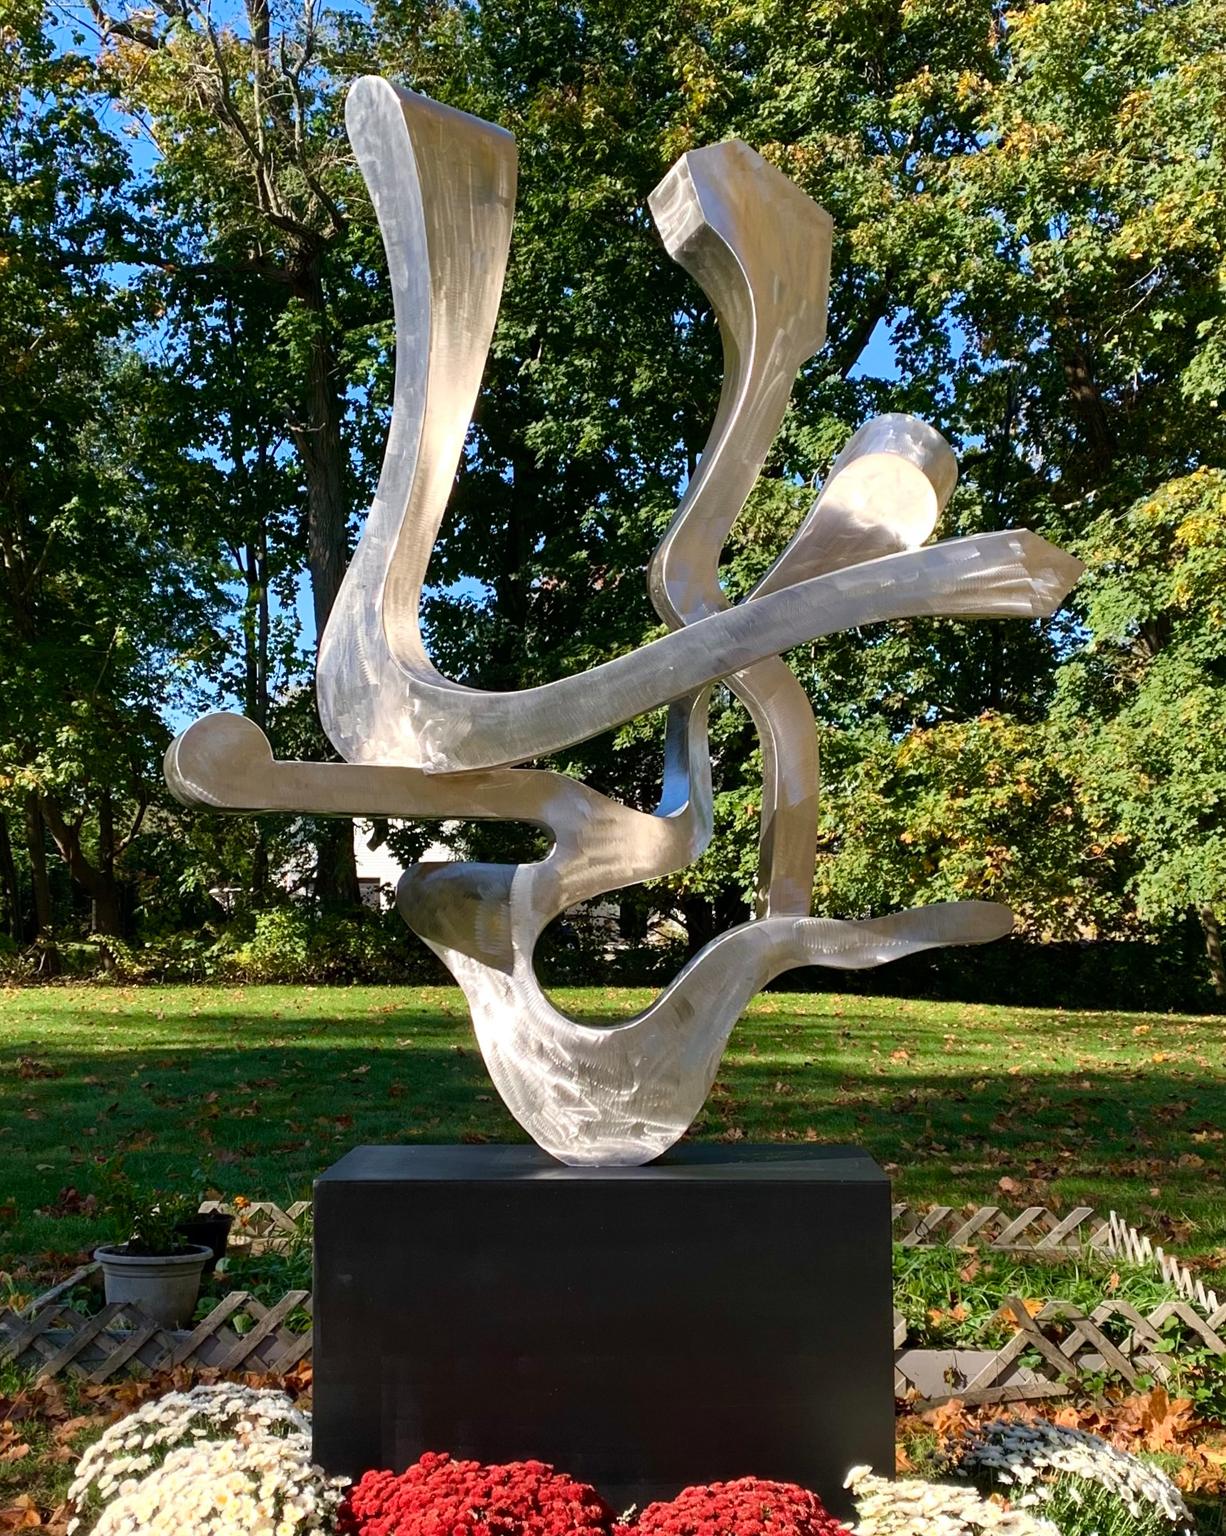 Kevin Barrett Abstract Sculpture - "Guided Spirit" Unique, Organic, Abstract Metal Sculpture in Steel